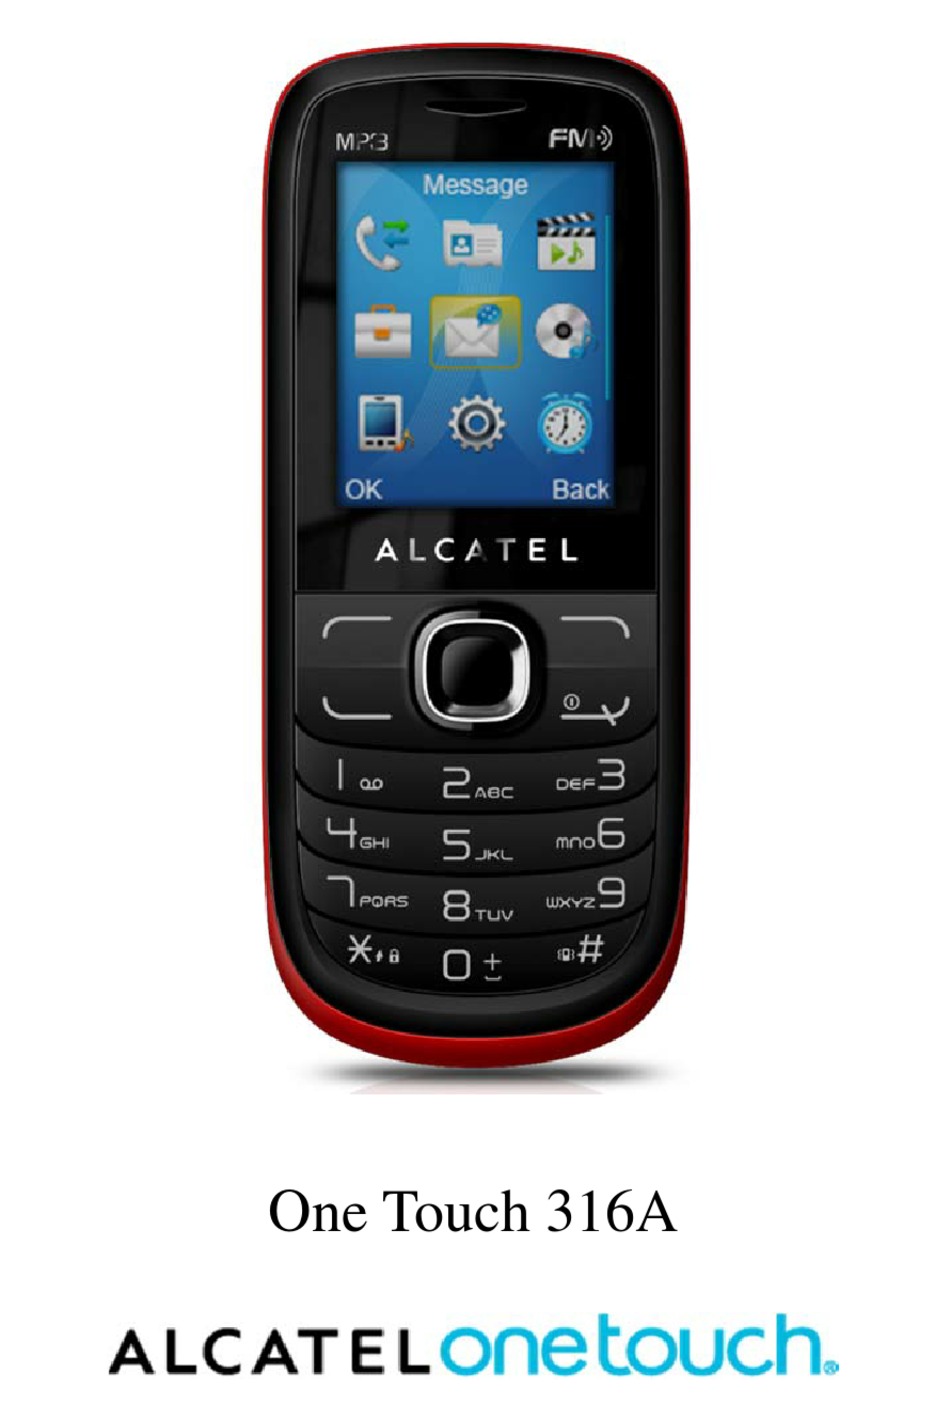 chocolate By-product Partina City ALCATEL ONE TOUCH 316A MANUAL Pdf Download | ManualsLib